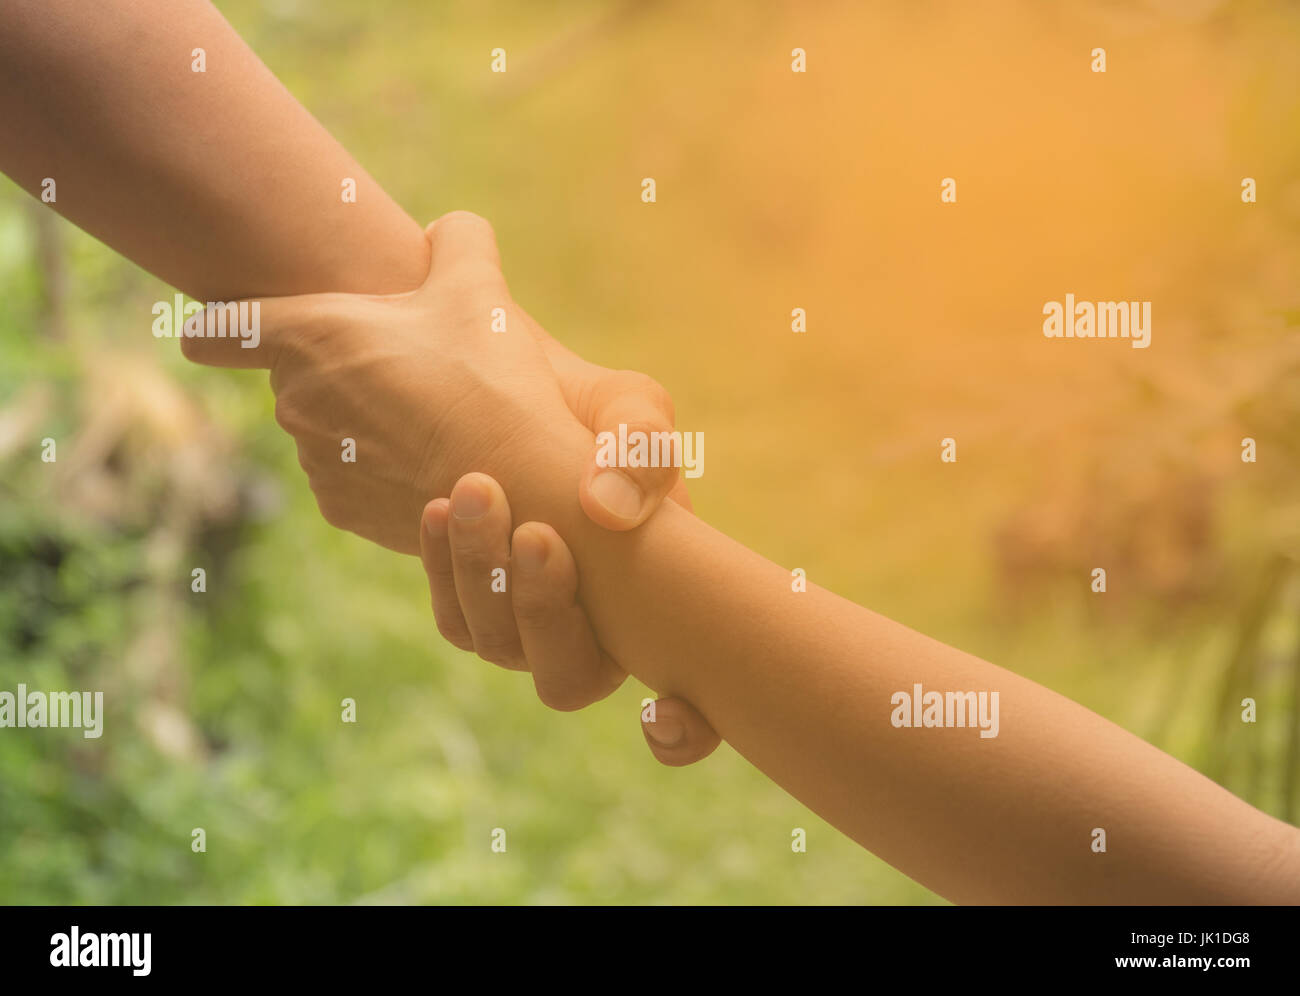 Two pairs of hand touch together, helping hands concept. Helping hand outstretched for help. Stock Photo